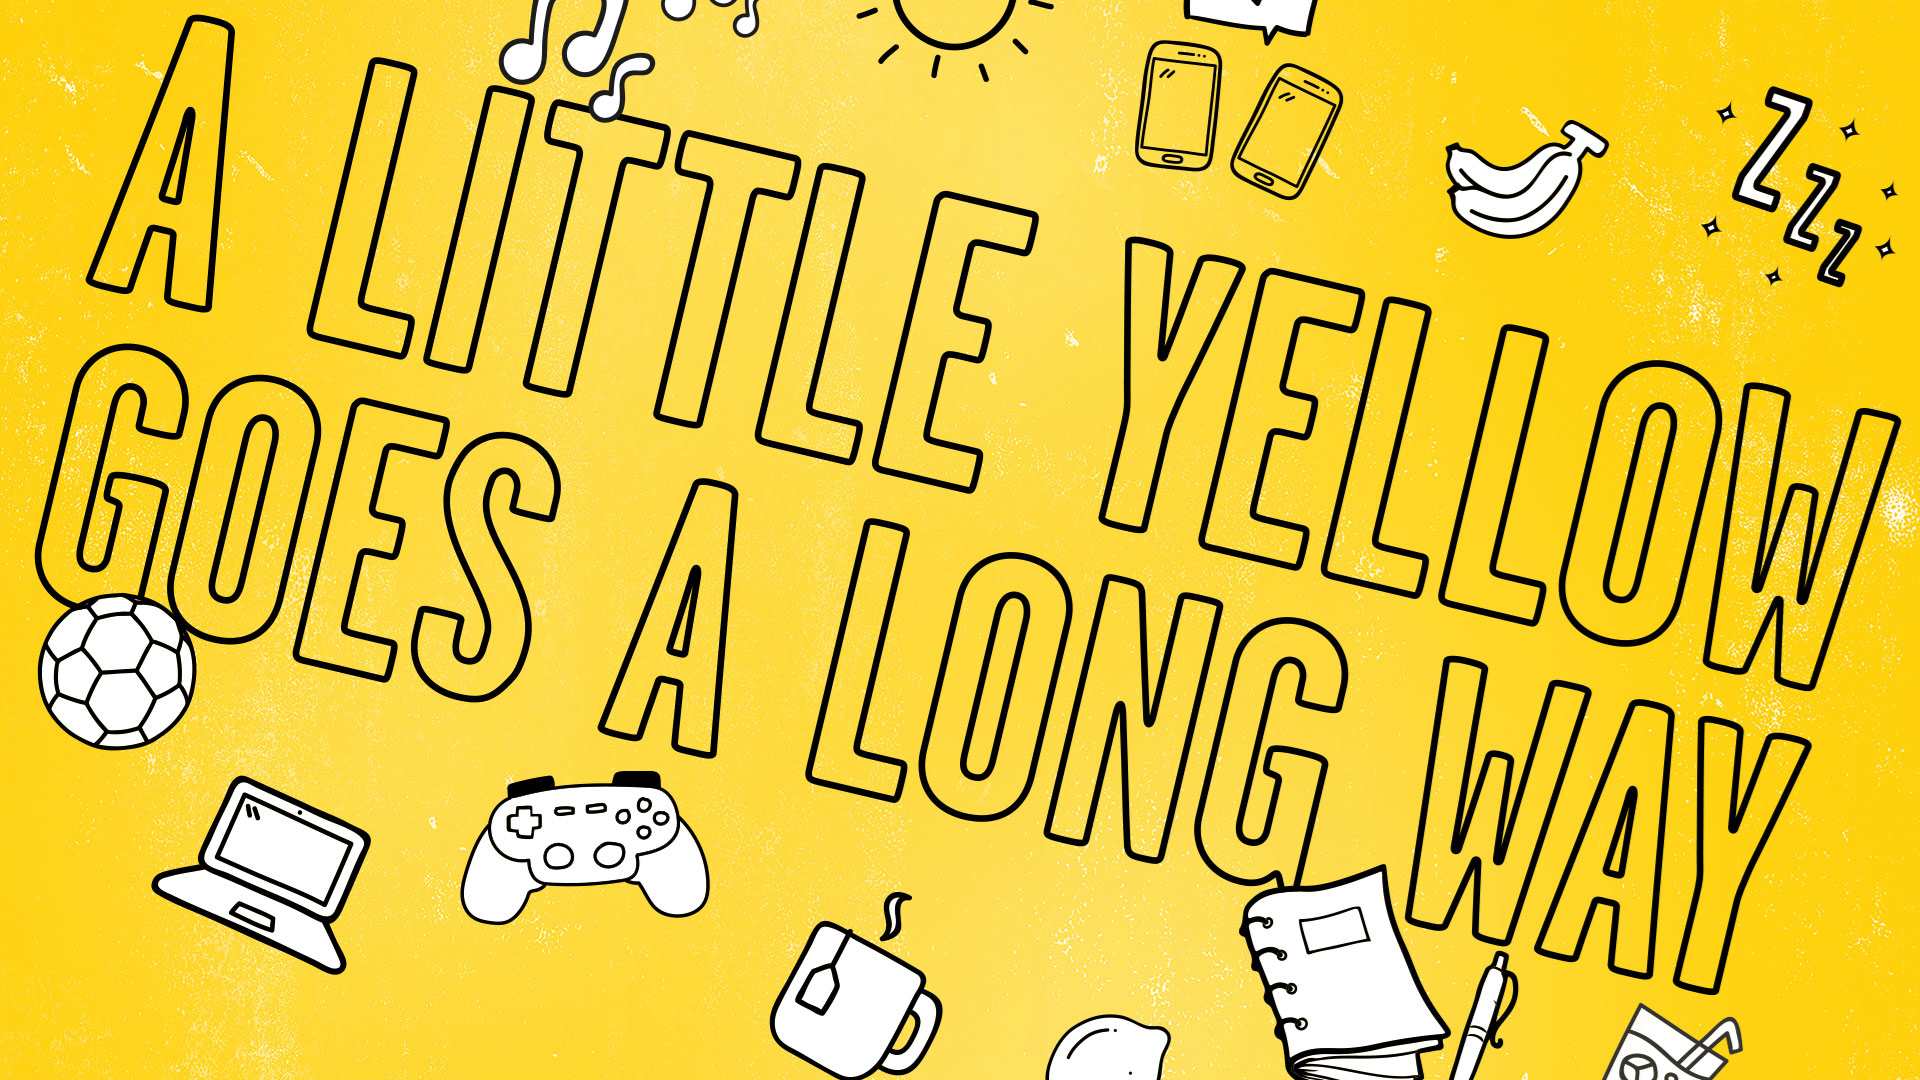 'A little yellow goes a long way' sits on top of a yellow background surrounded by different objects like phones, laptops, tea, football and a game controller.